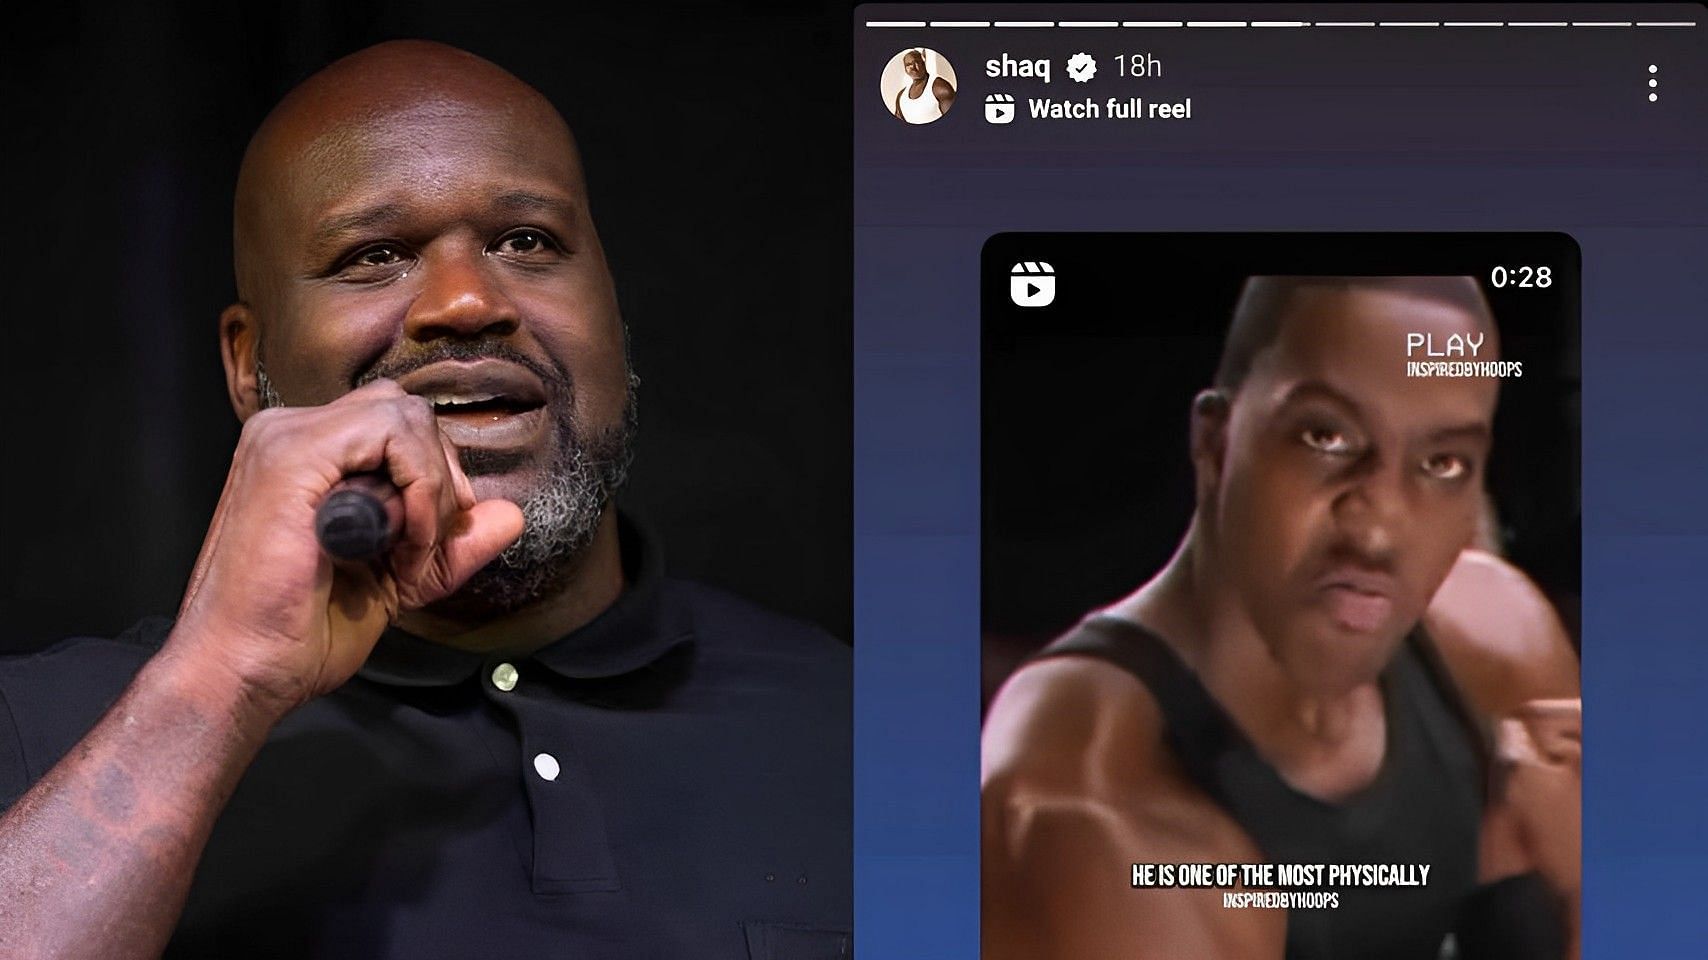 After years of feuding, Shaquille O